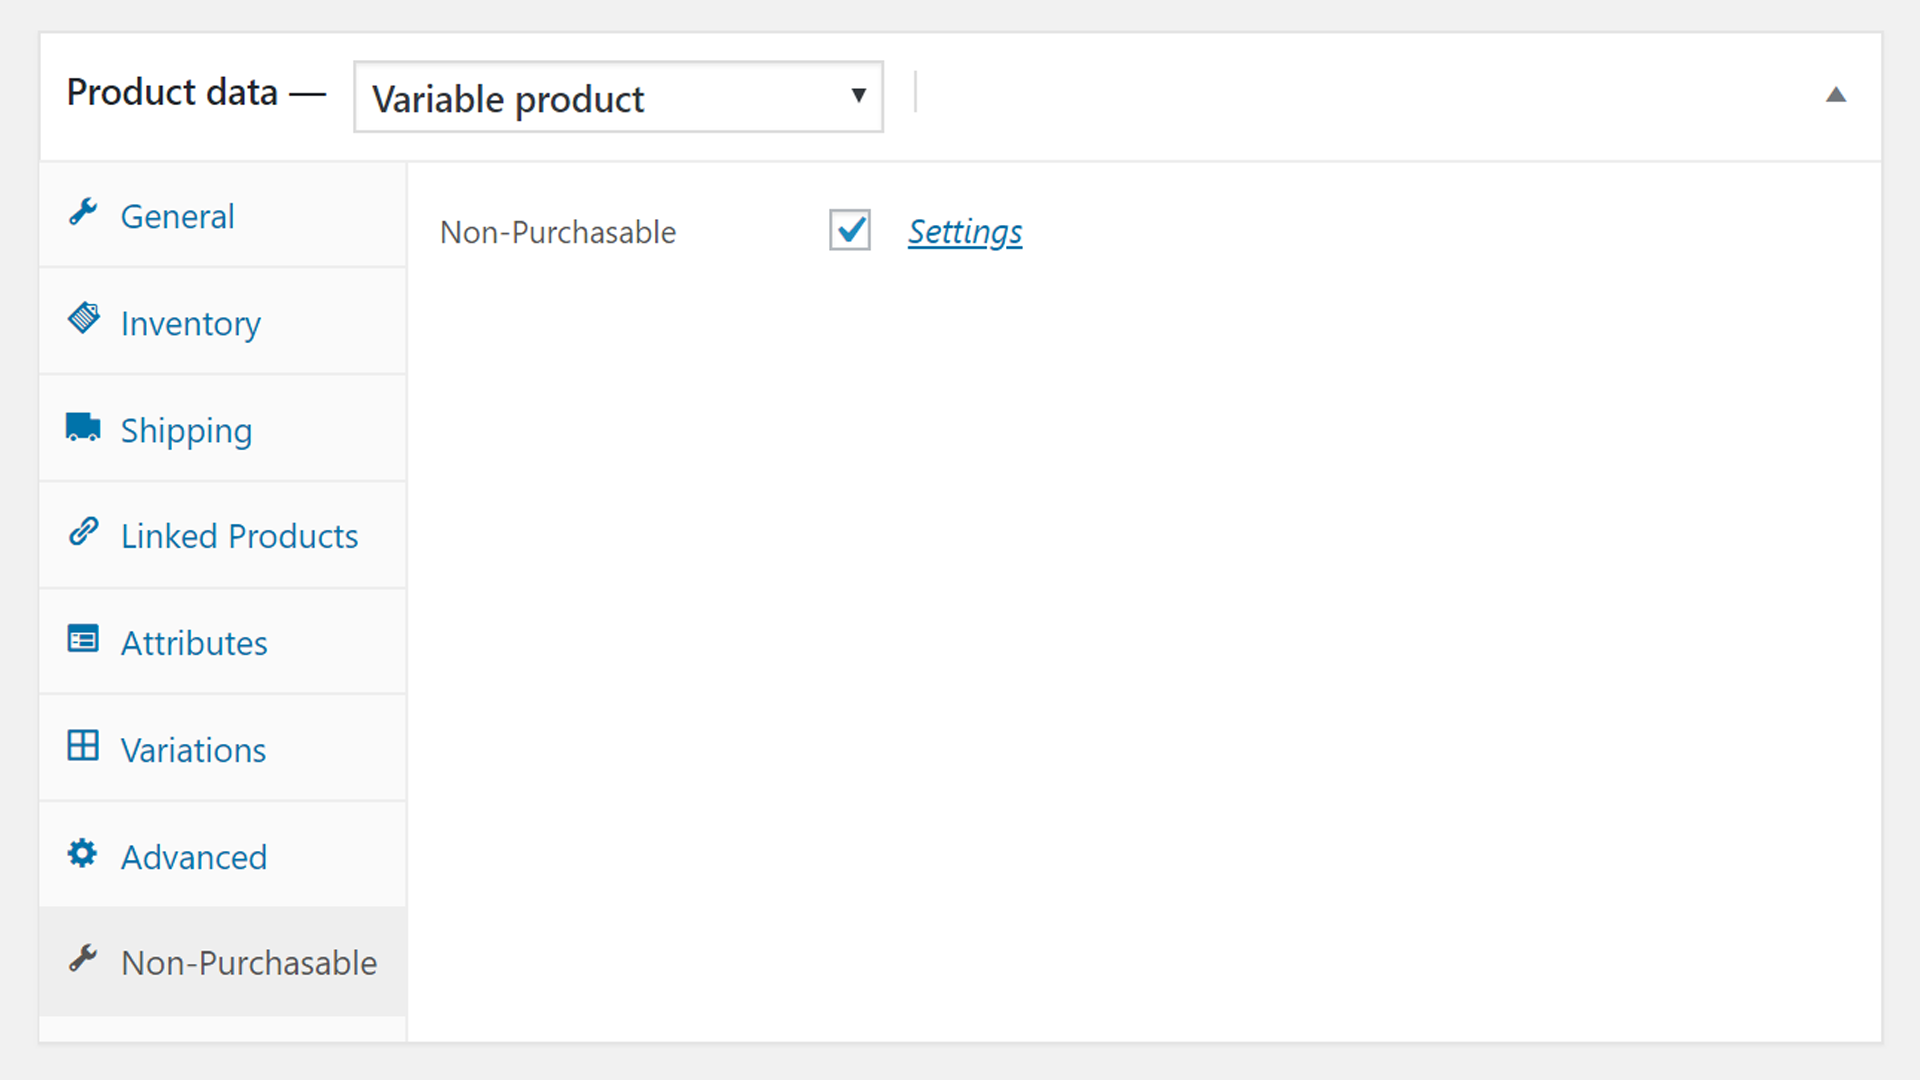 Set a product to "Non-Purchasable" in the *Product Data* box.